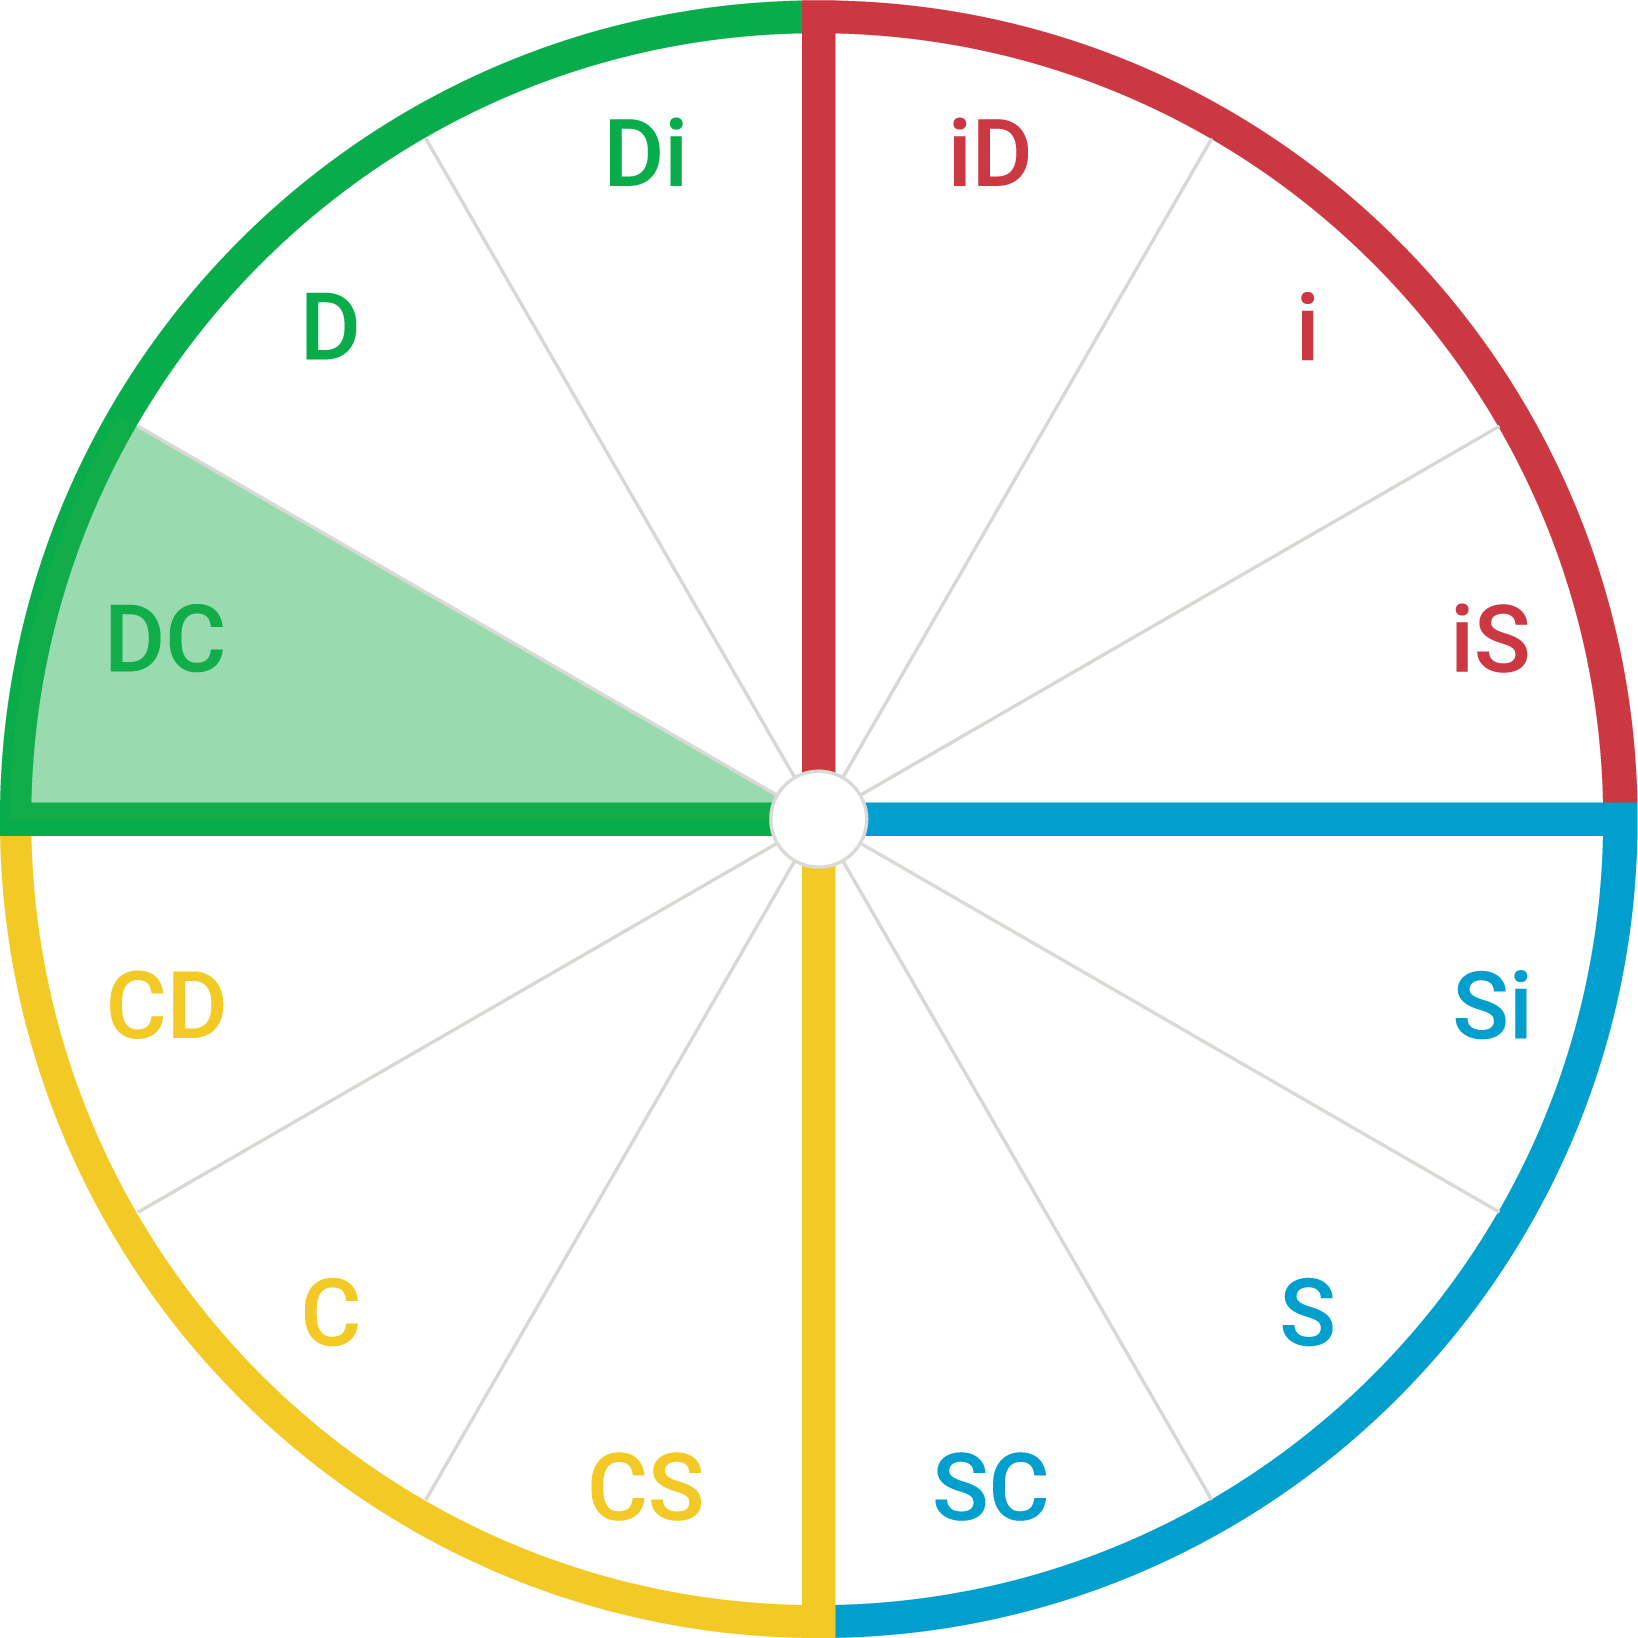 DiSC map showing the DC style